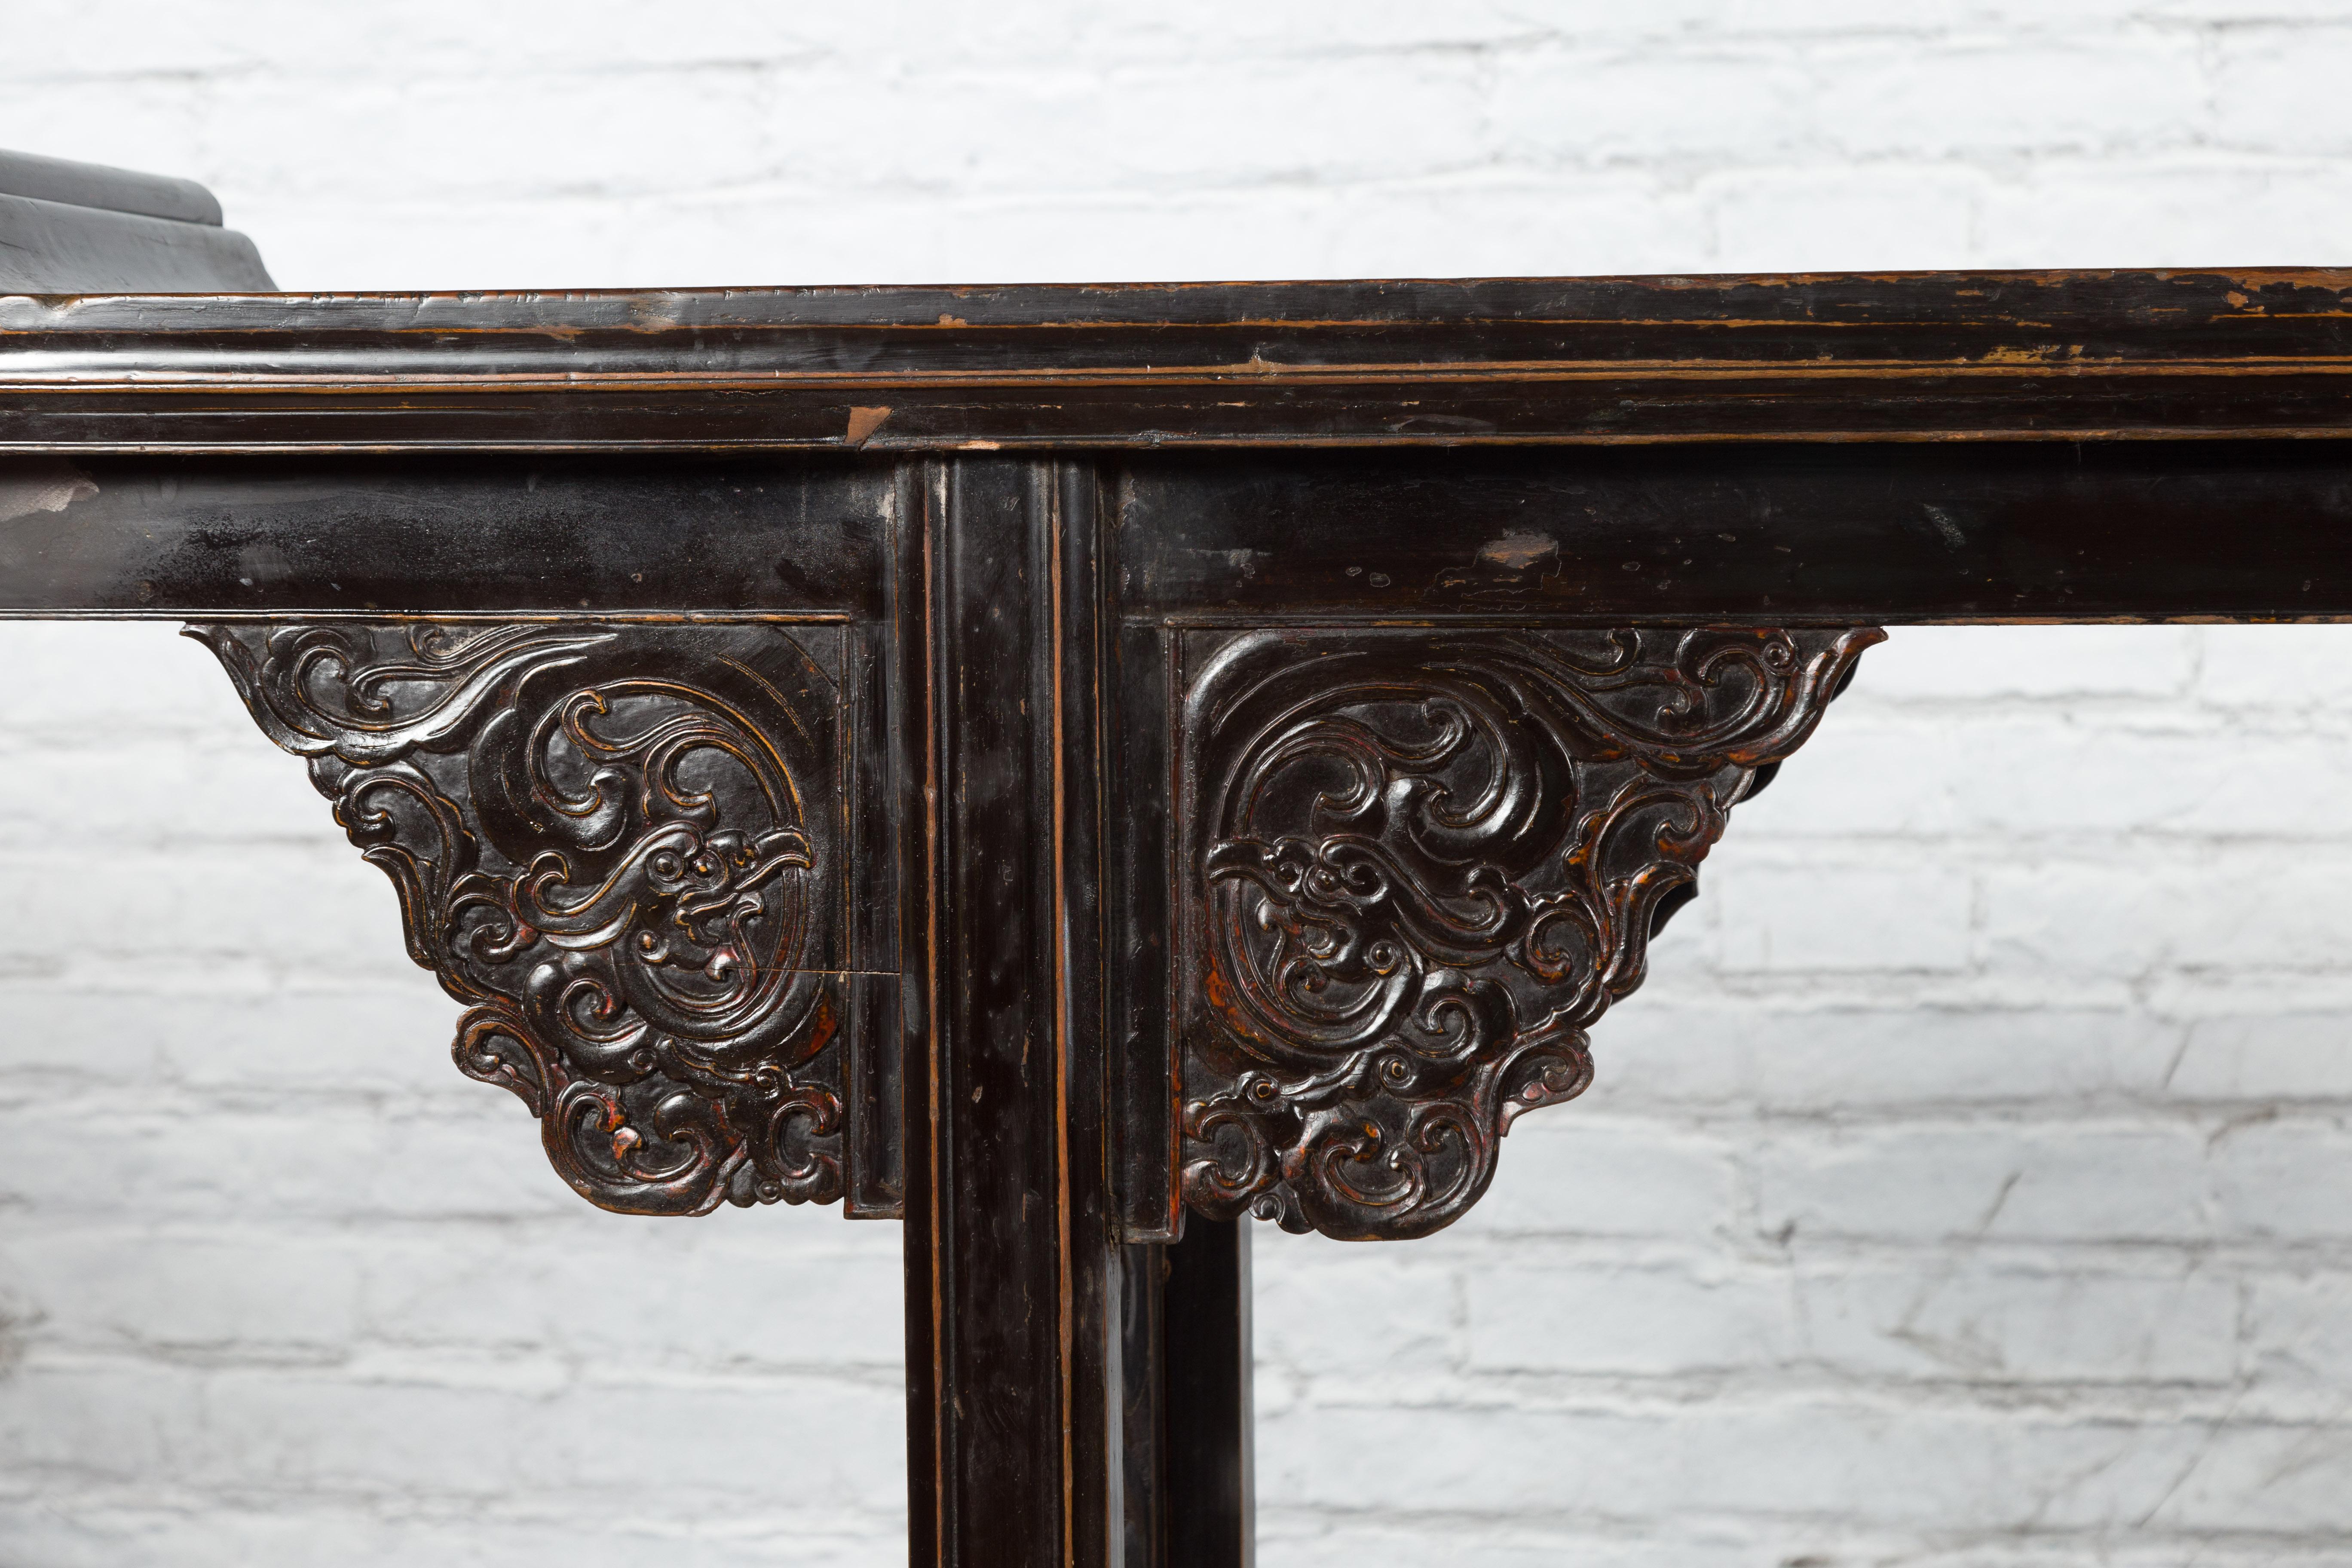 Chinese Qing Dynasty 19th Century Black Console Table with Carved Dragon Motifs For Sale 8